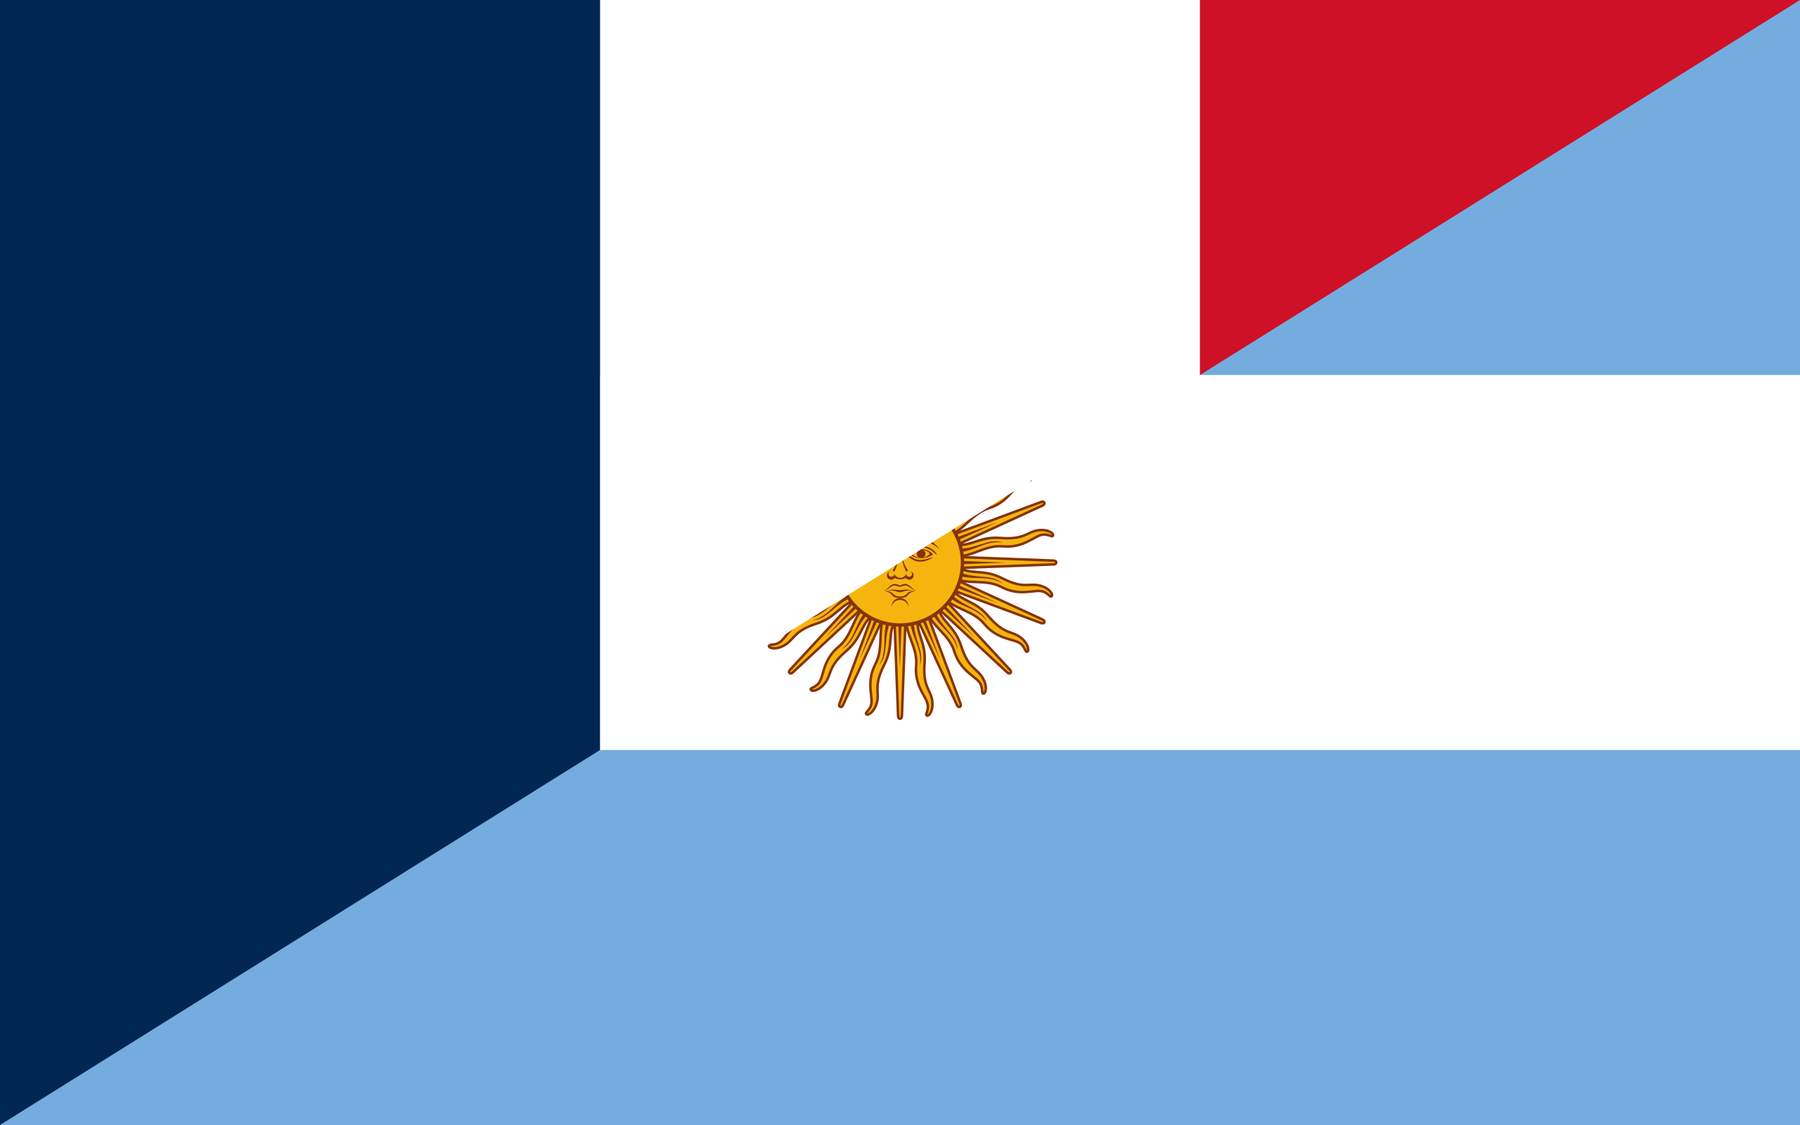 How To Find Argentinian Products In France?